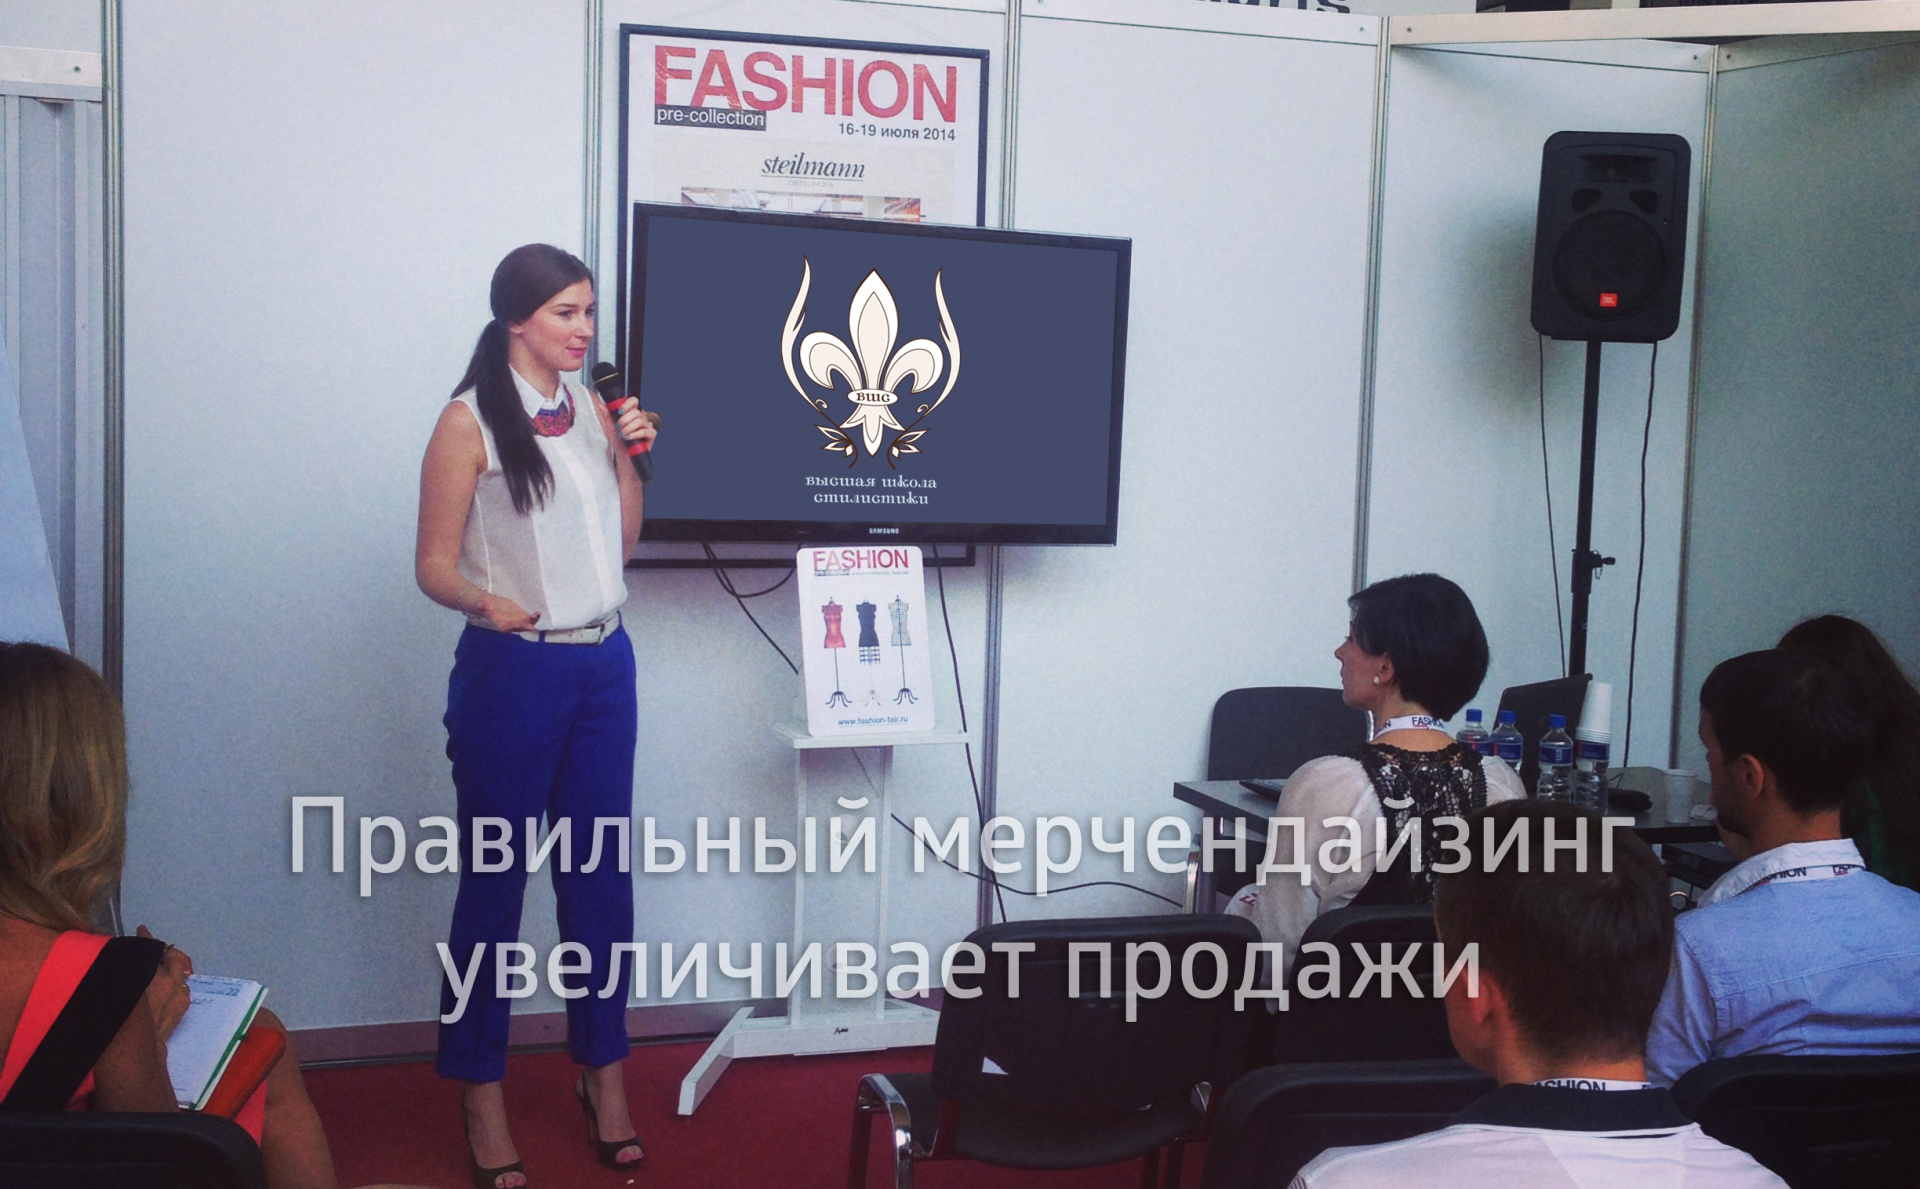 Course "Visual merchandising and showcase"